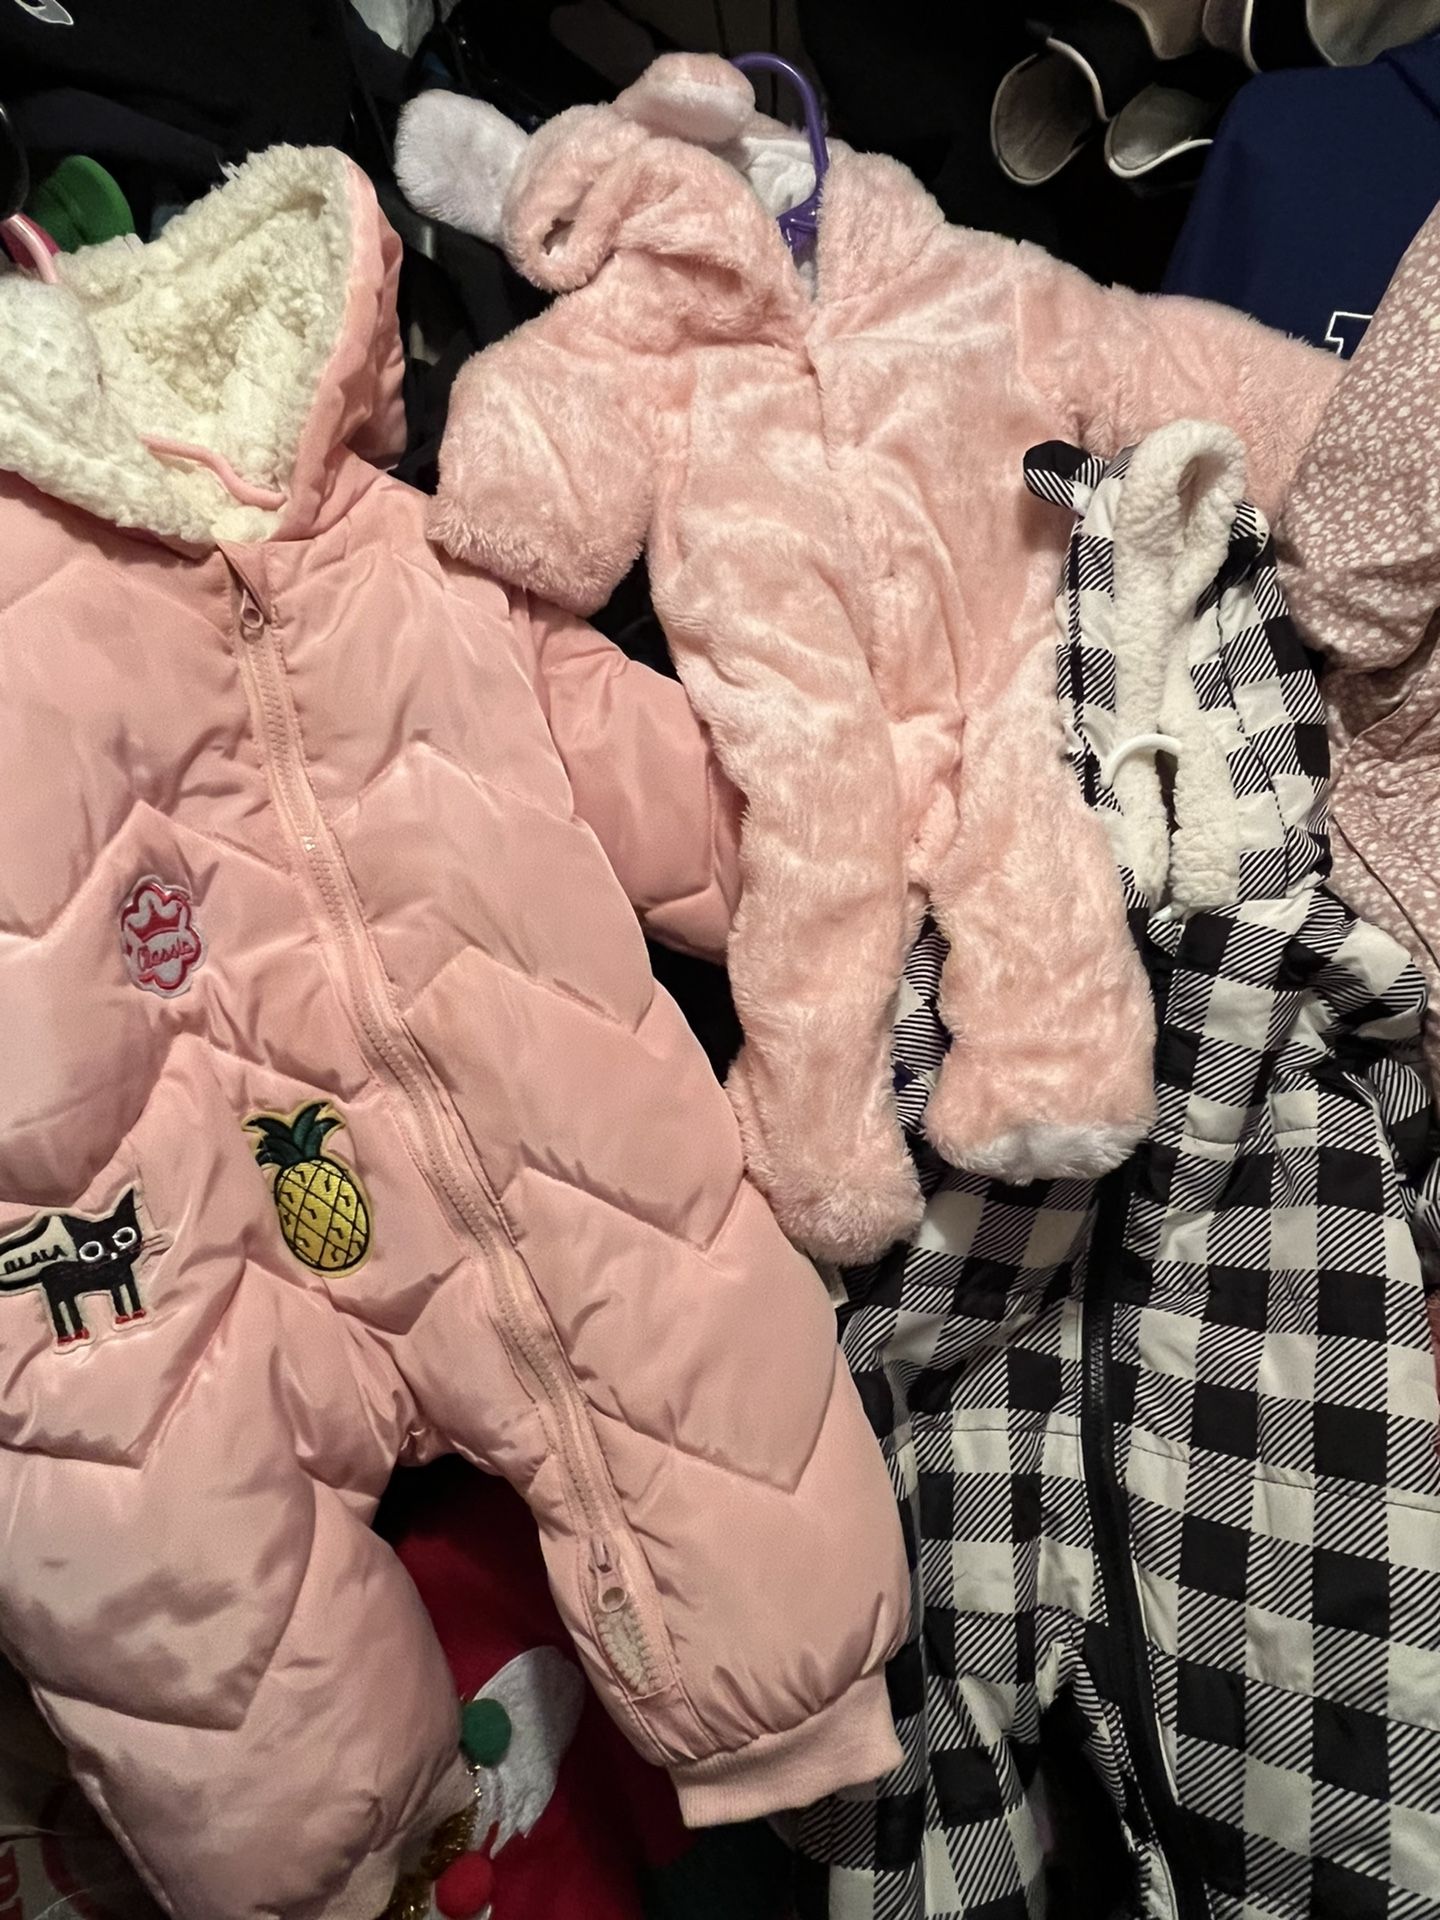 New & Used In New condition)  0-3, 6,6-9 Months) Snowsuit $15,$20,&$25..((Baby Shoes And Boots,Soft Bottom 0-3  3-6(Sz 1 &2)$12,$15 $20 & Up👇🏽